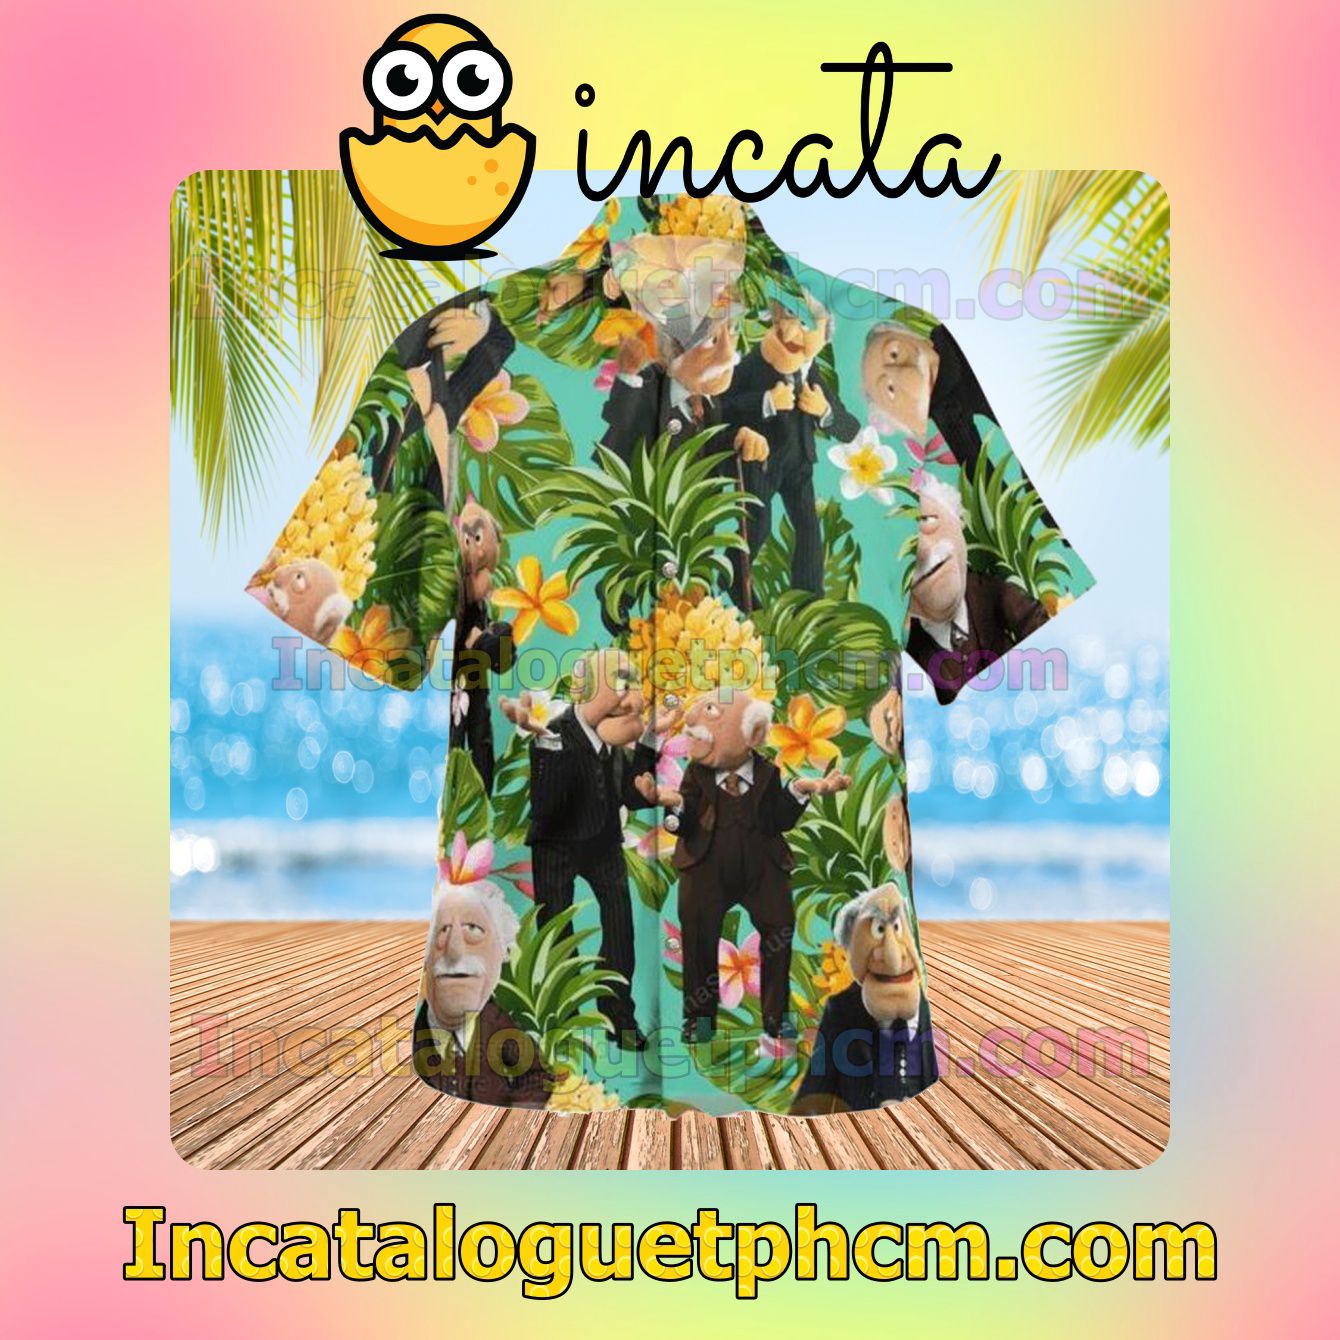 Discount Statler And Waldorf The Muppet Tropical Pineapple Short Sleeve Shirt